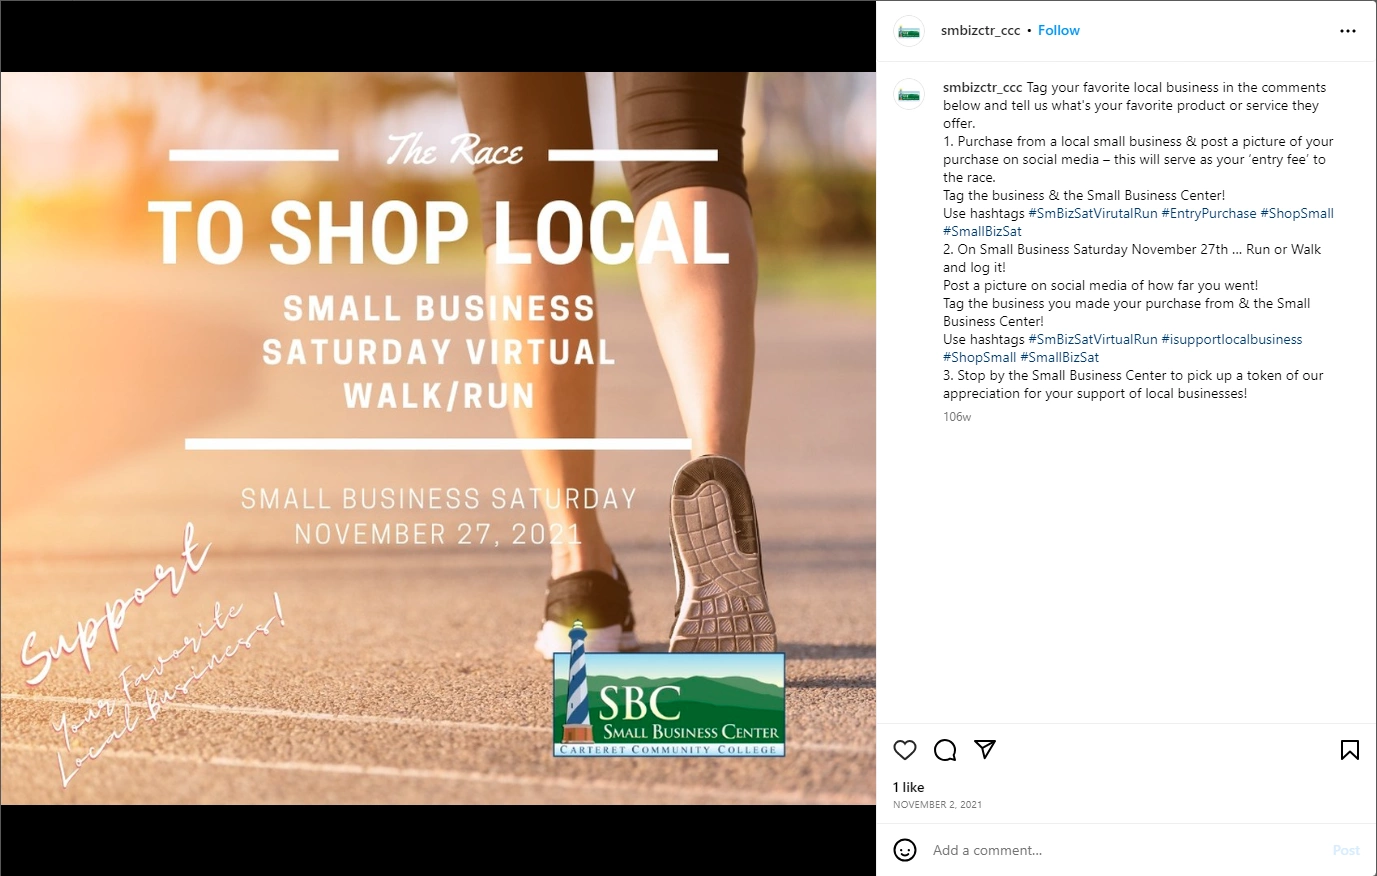 Virtual small business Saturday event - Small Business Center